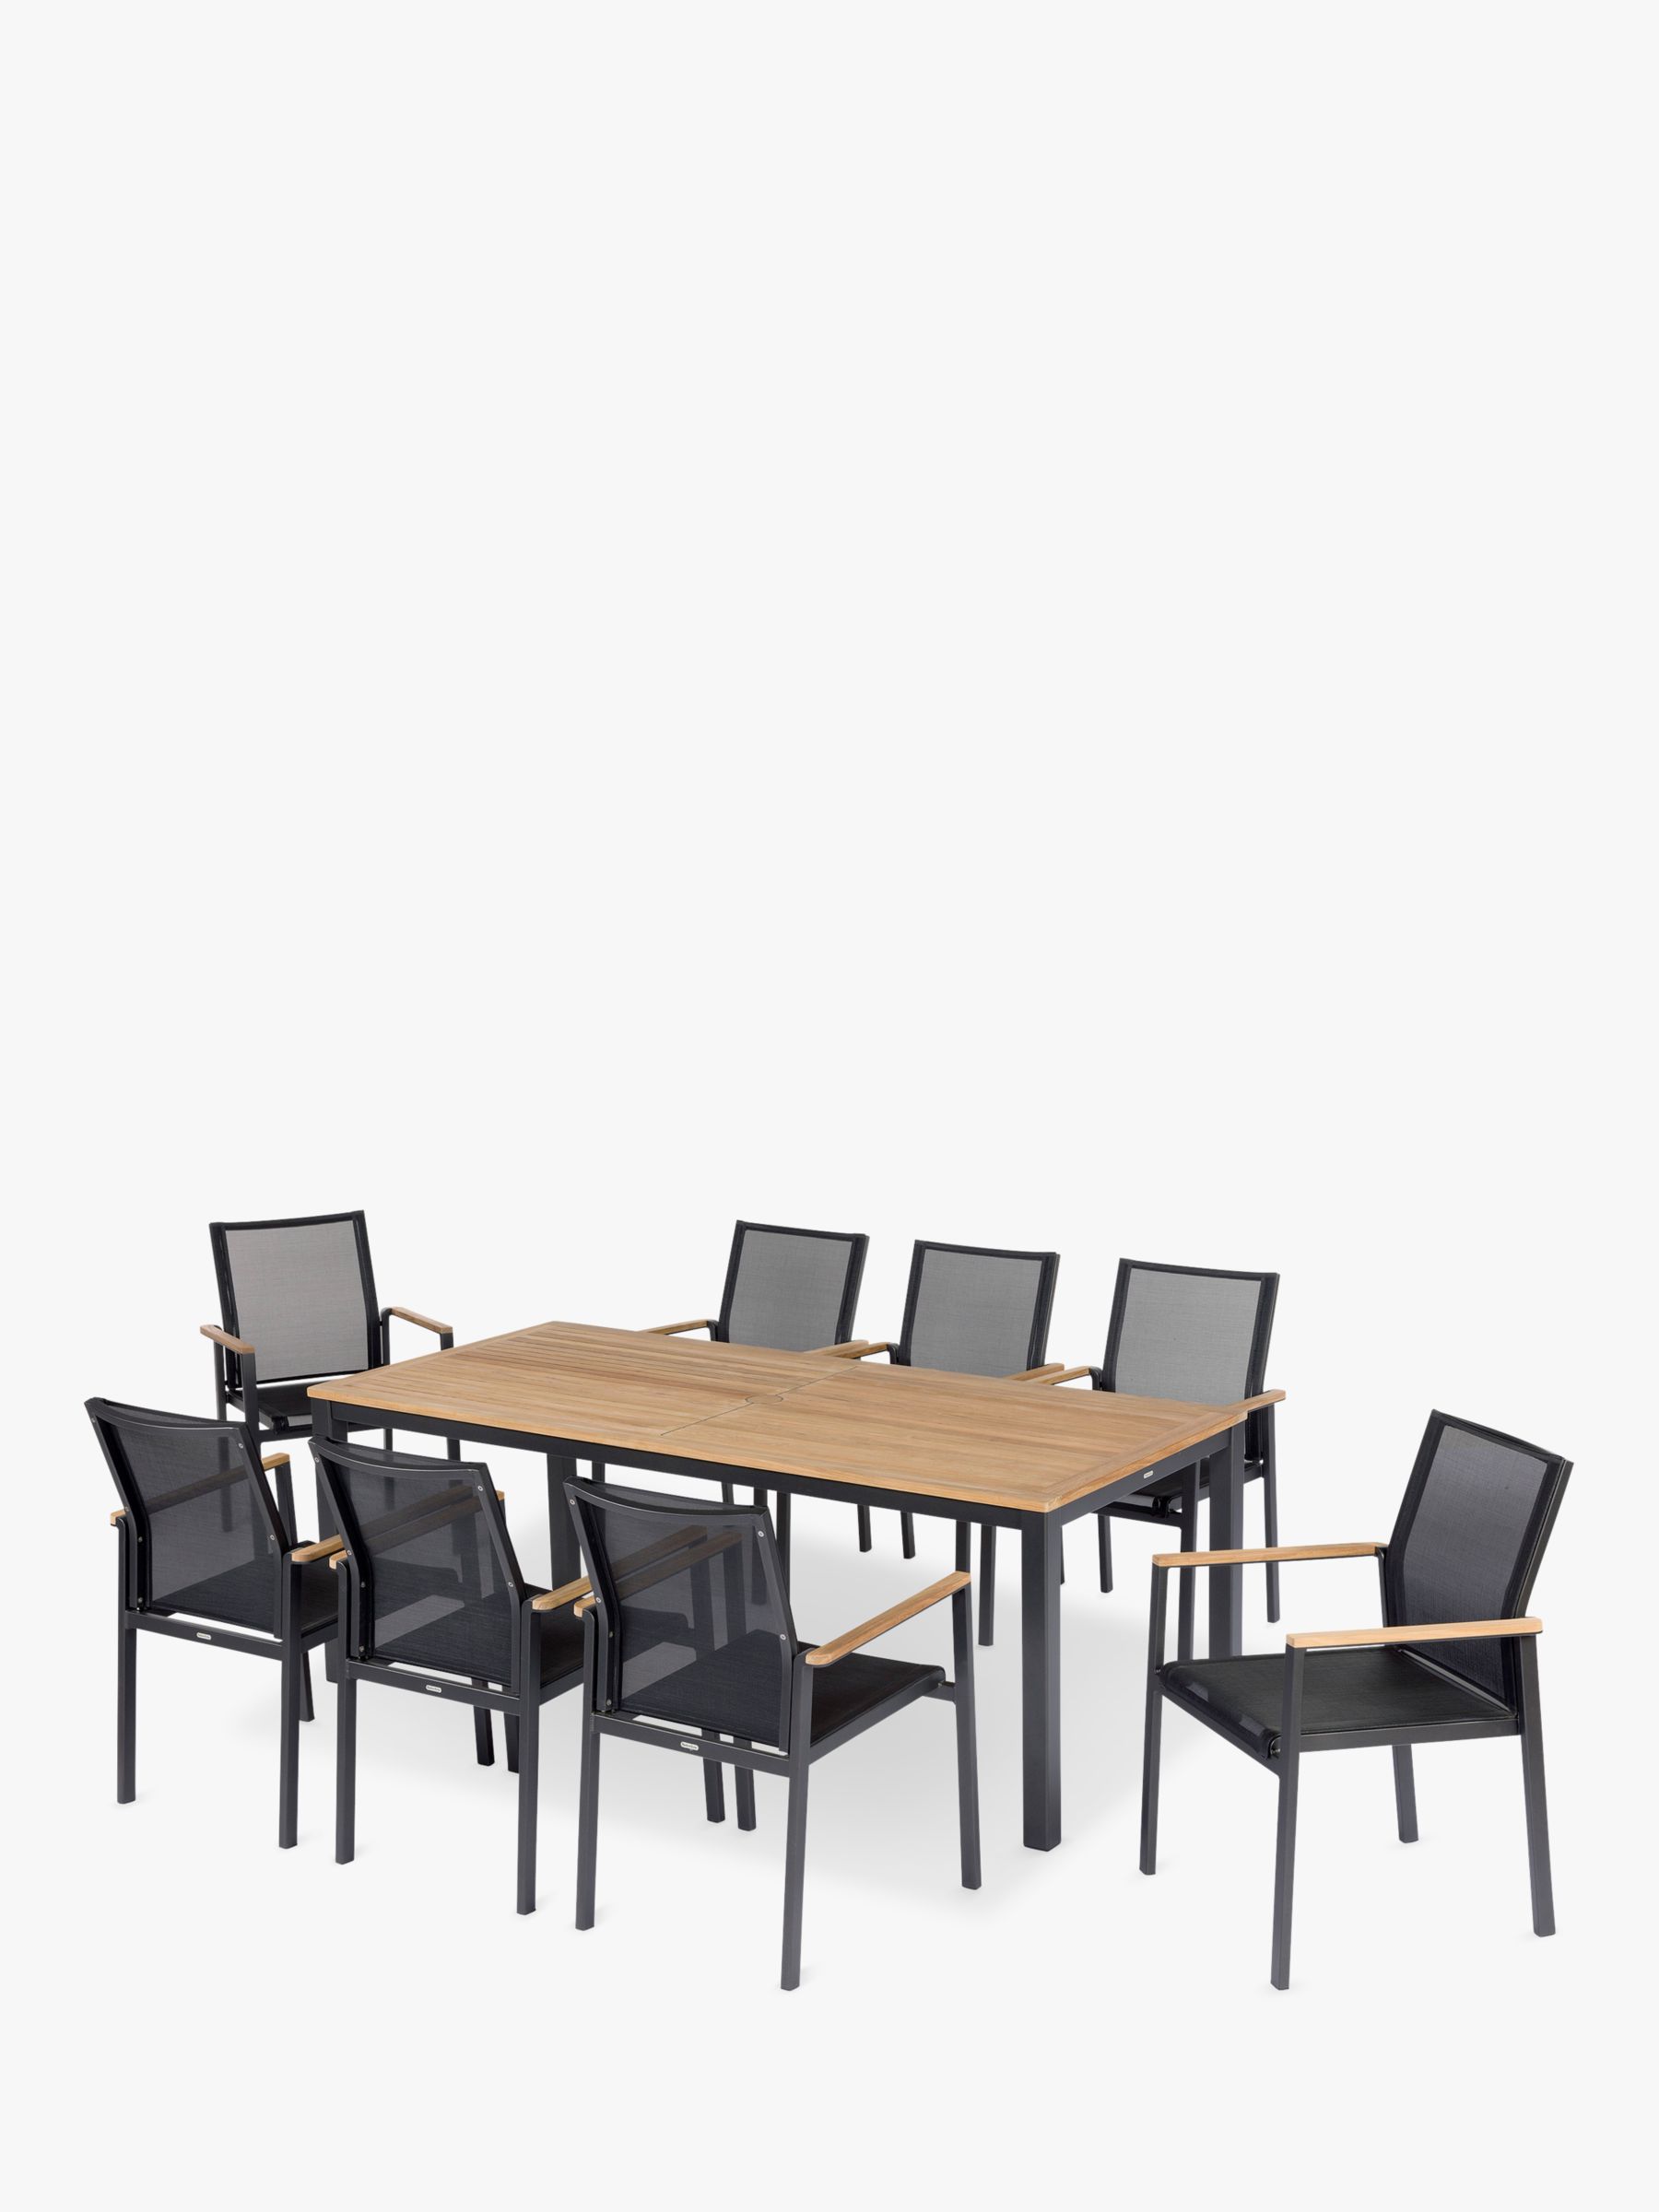 Photo of Barlow tyrie aura 8-seater teak wood garden dining table & chairs set charcoal/natural